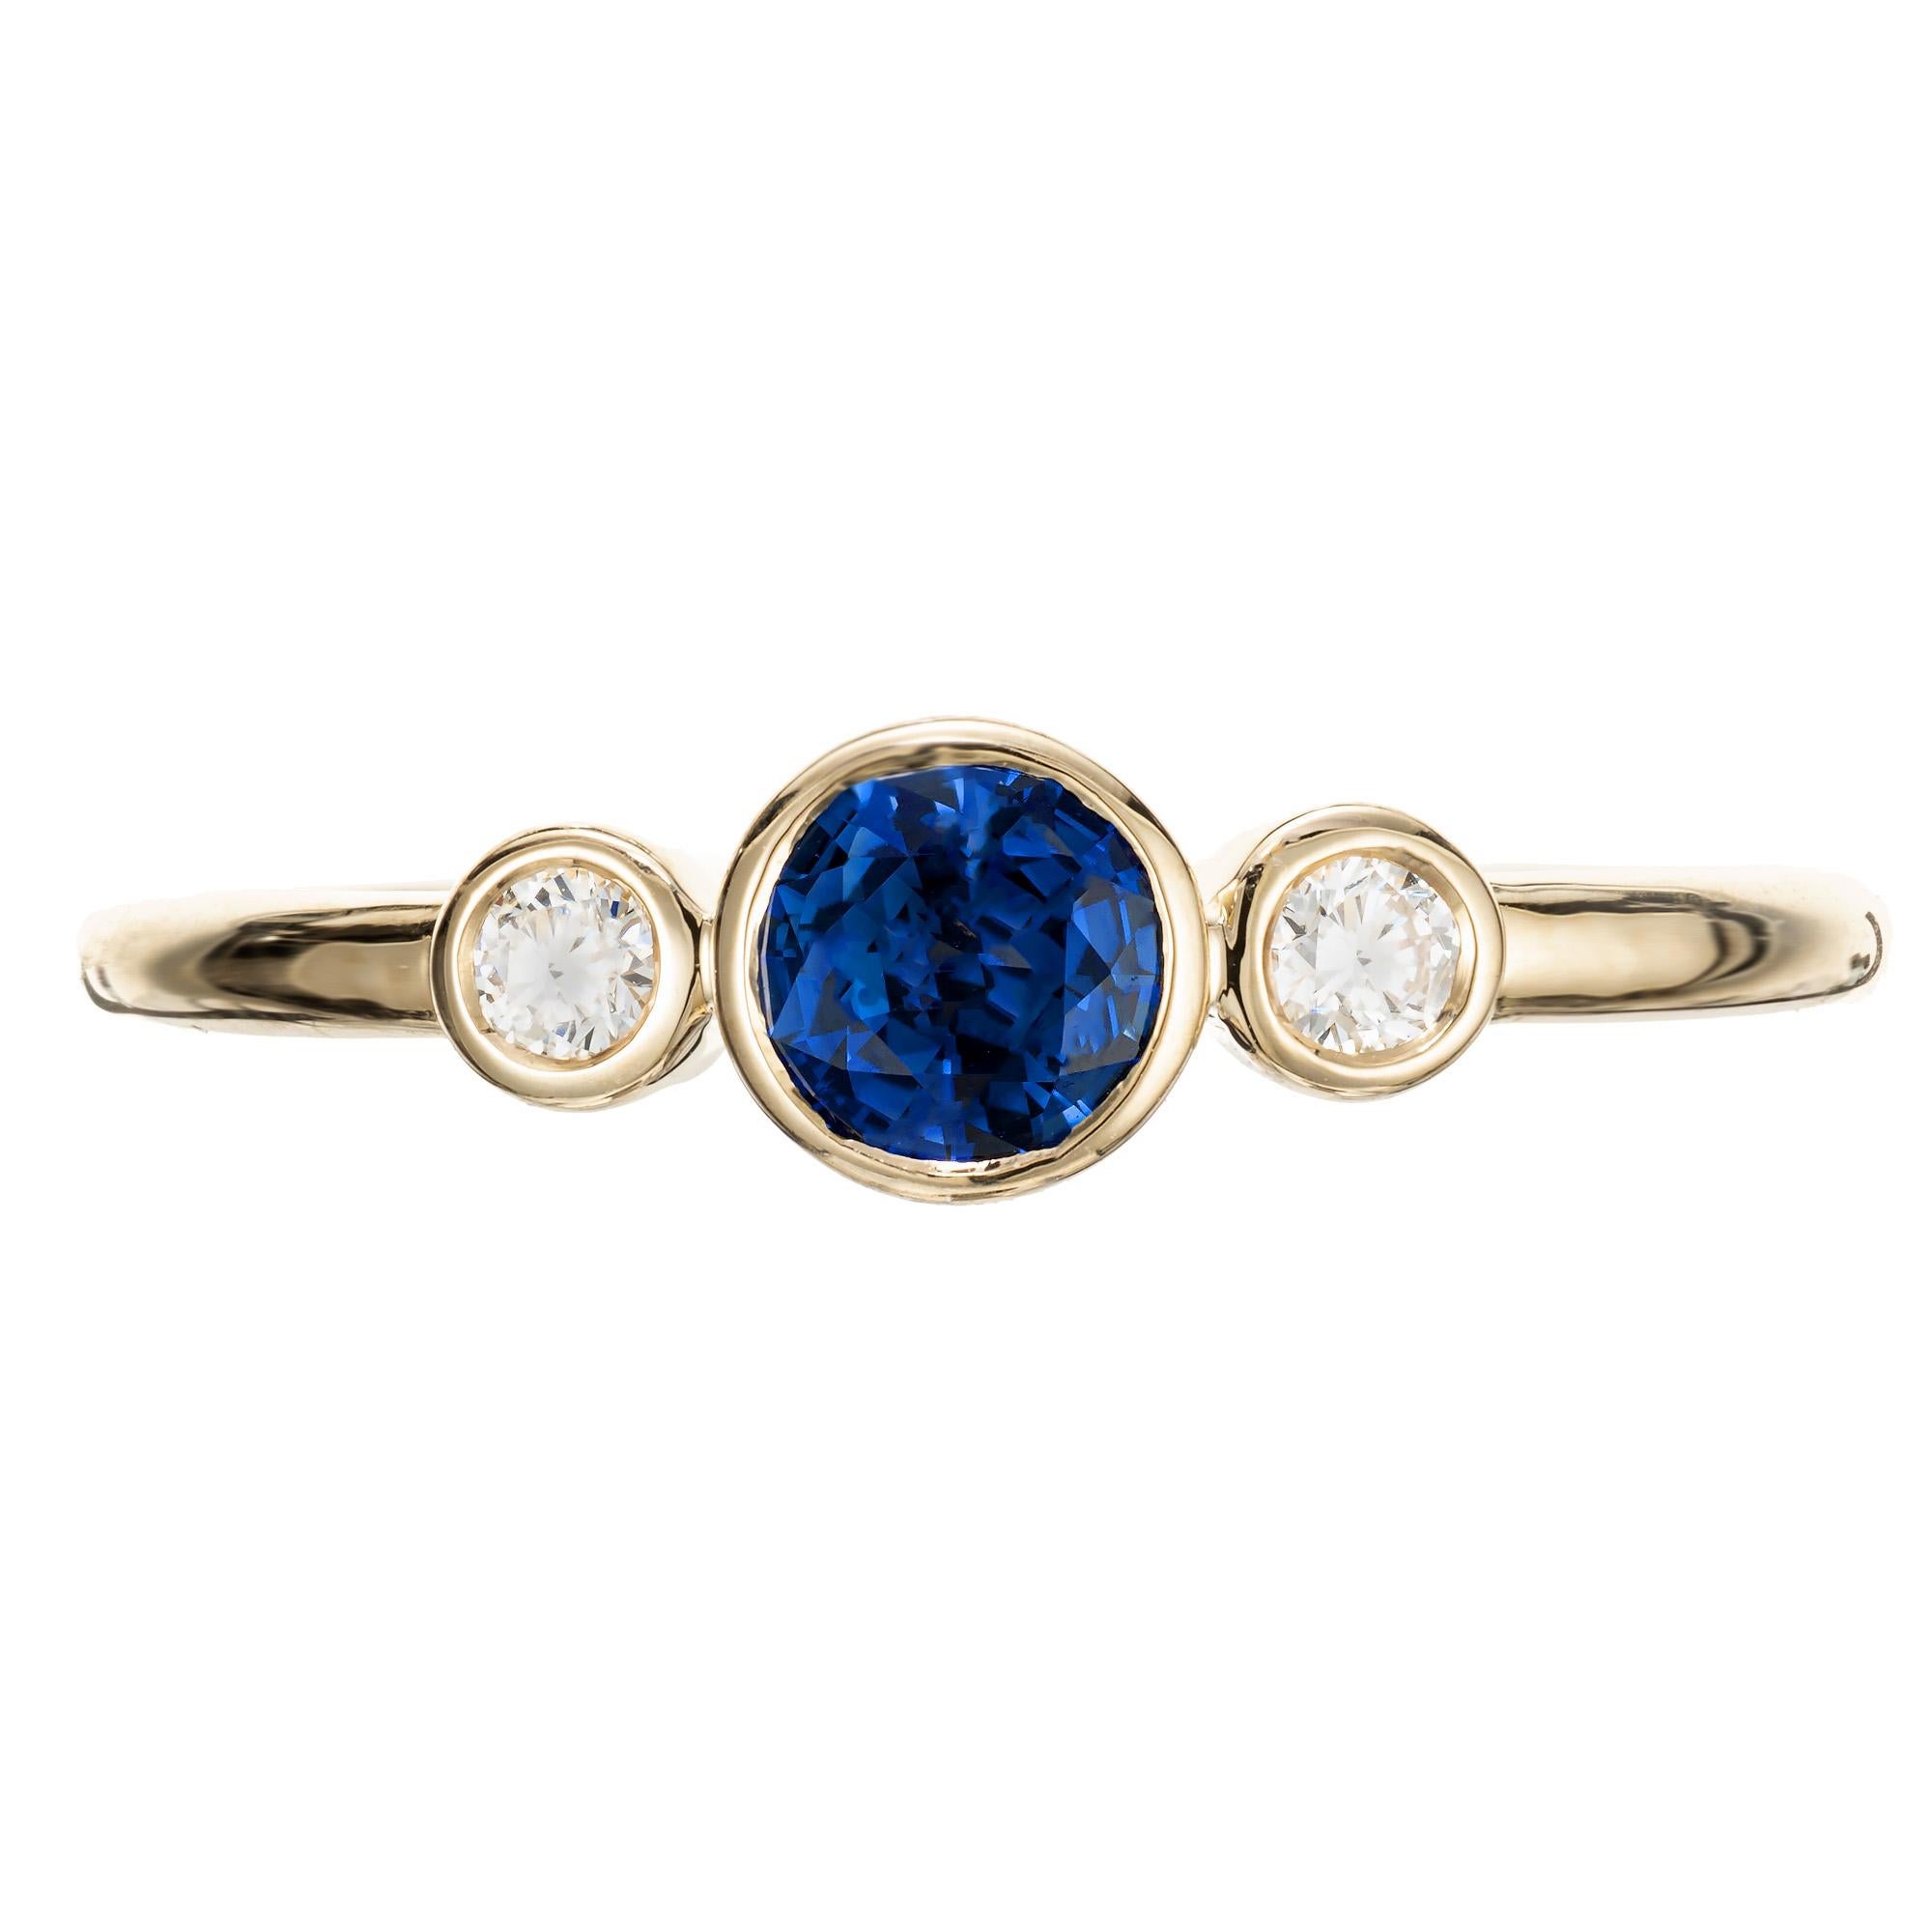 Sapphire and diamond engagement. 1 round .46ct bezel set sapphire center stone with 2 bezel set round cut diamonds in a 18k yellow gold setting. Designed and crafted in the Peter Suchy workshop

1 round blue sapphire, approx. .46cts
2 round